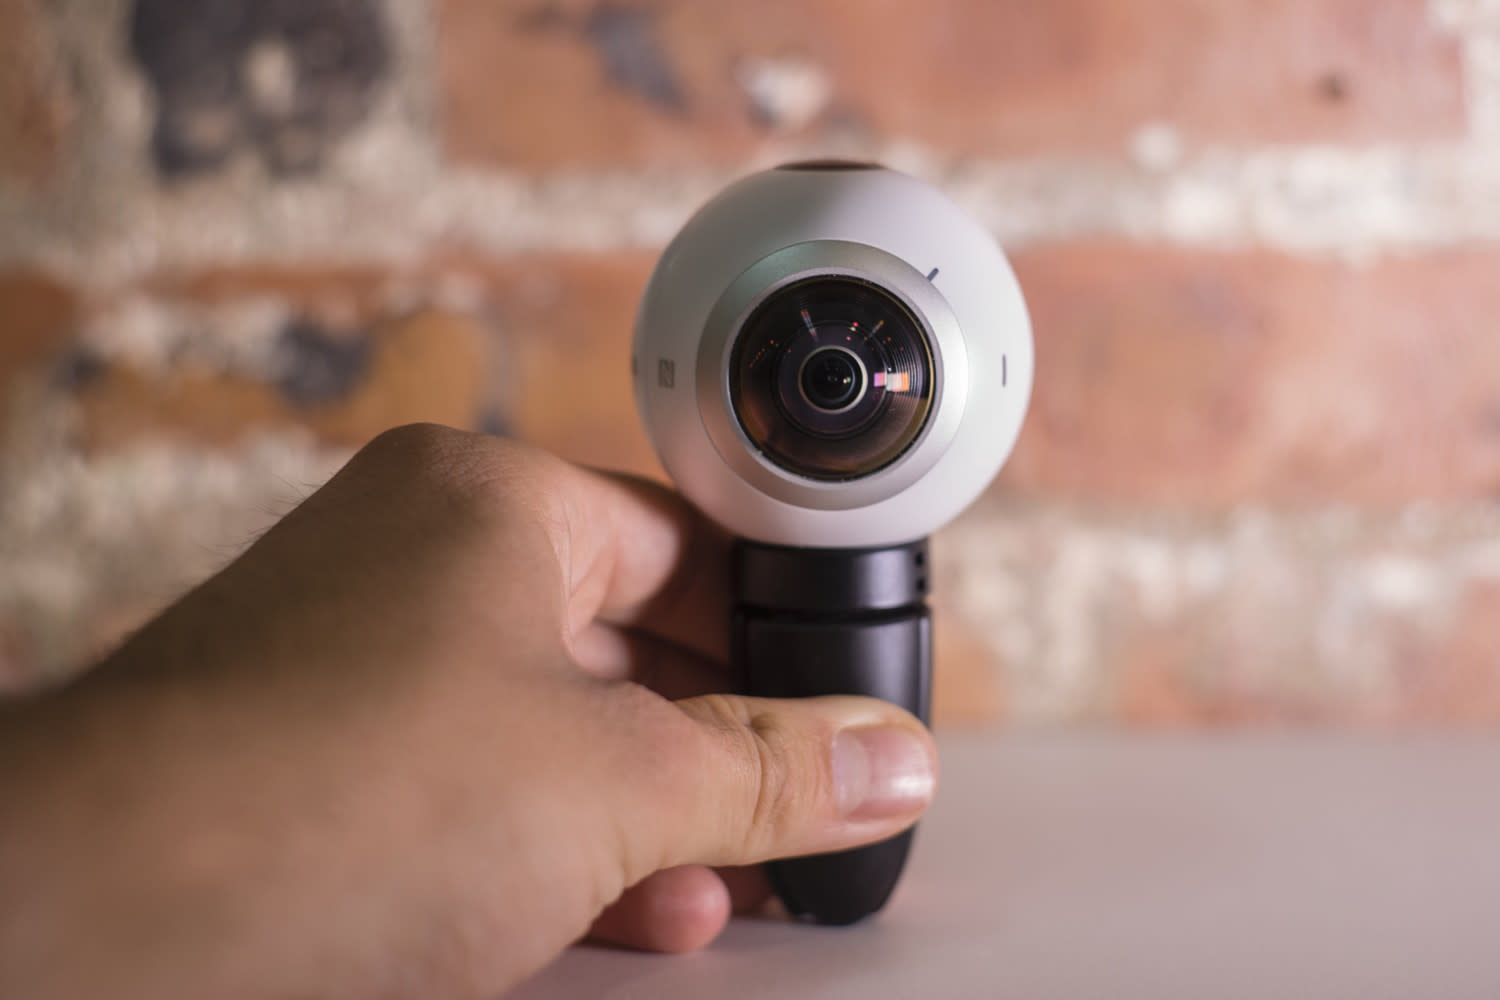 Reuters to produce VR news content with Samsung Gear 360 cameras